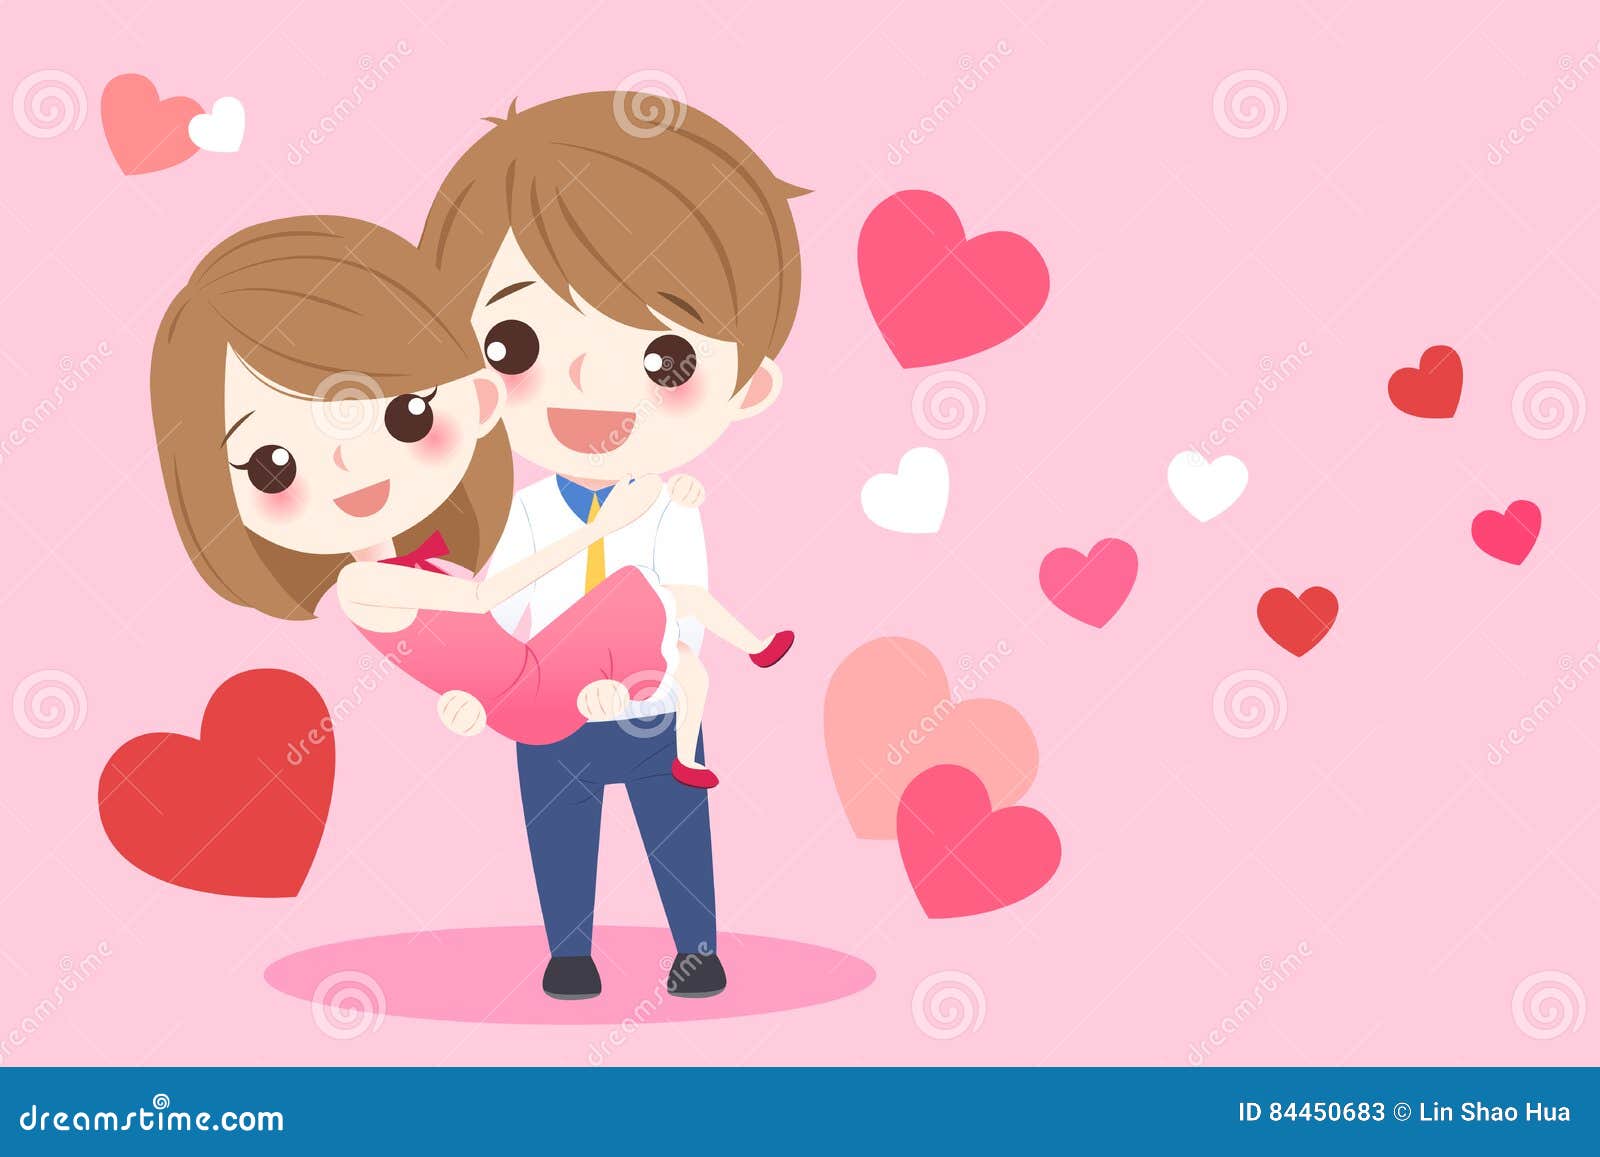 Cartoon Couple Holding Together Stock Vector - Illustration of ...